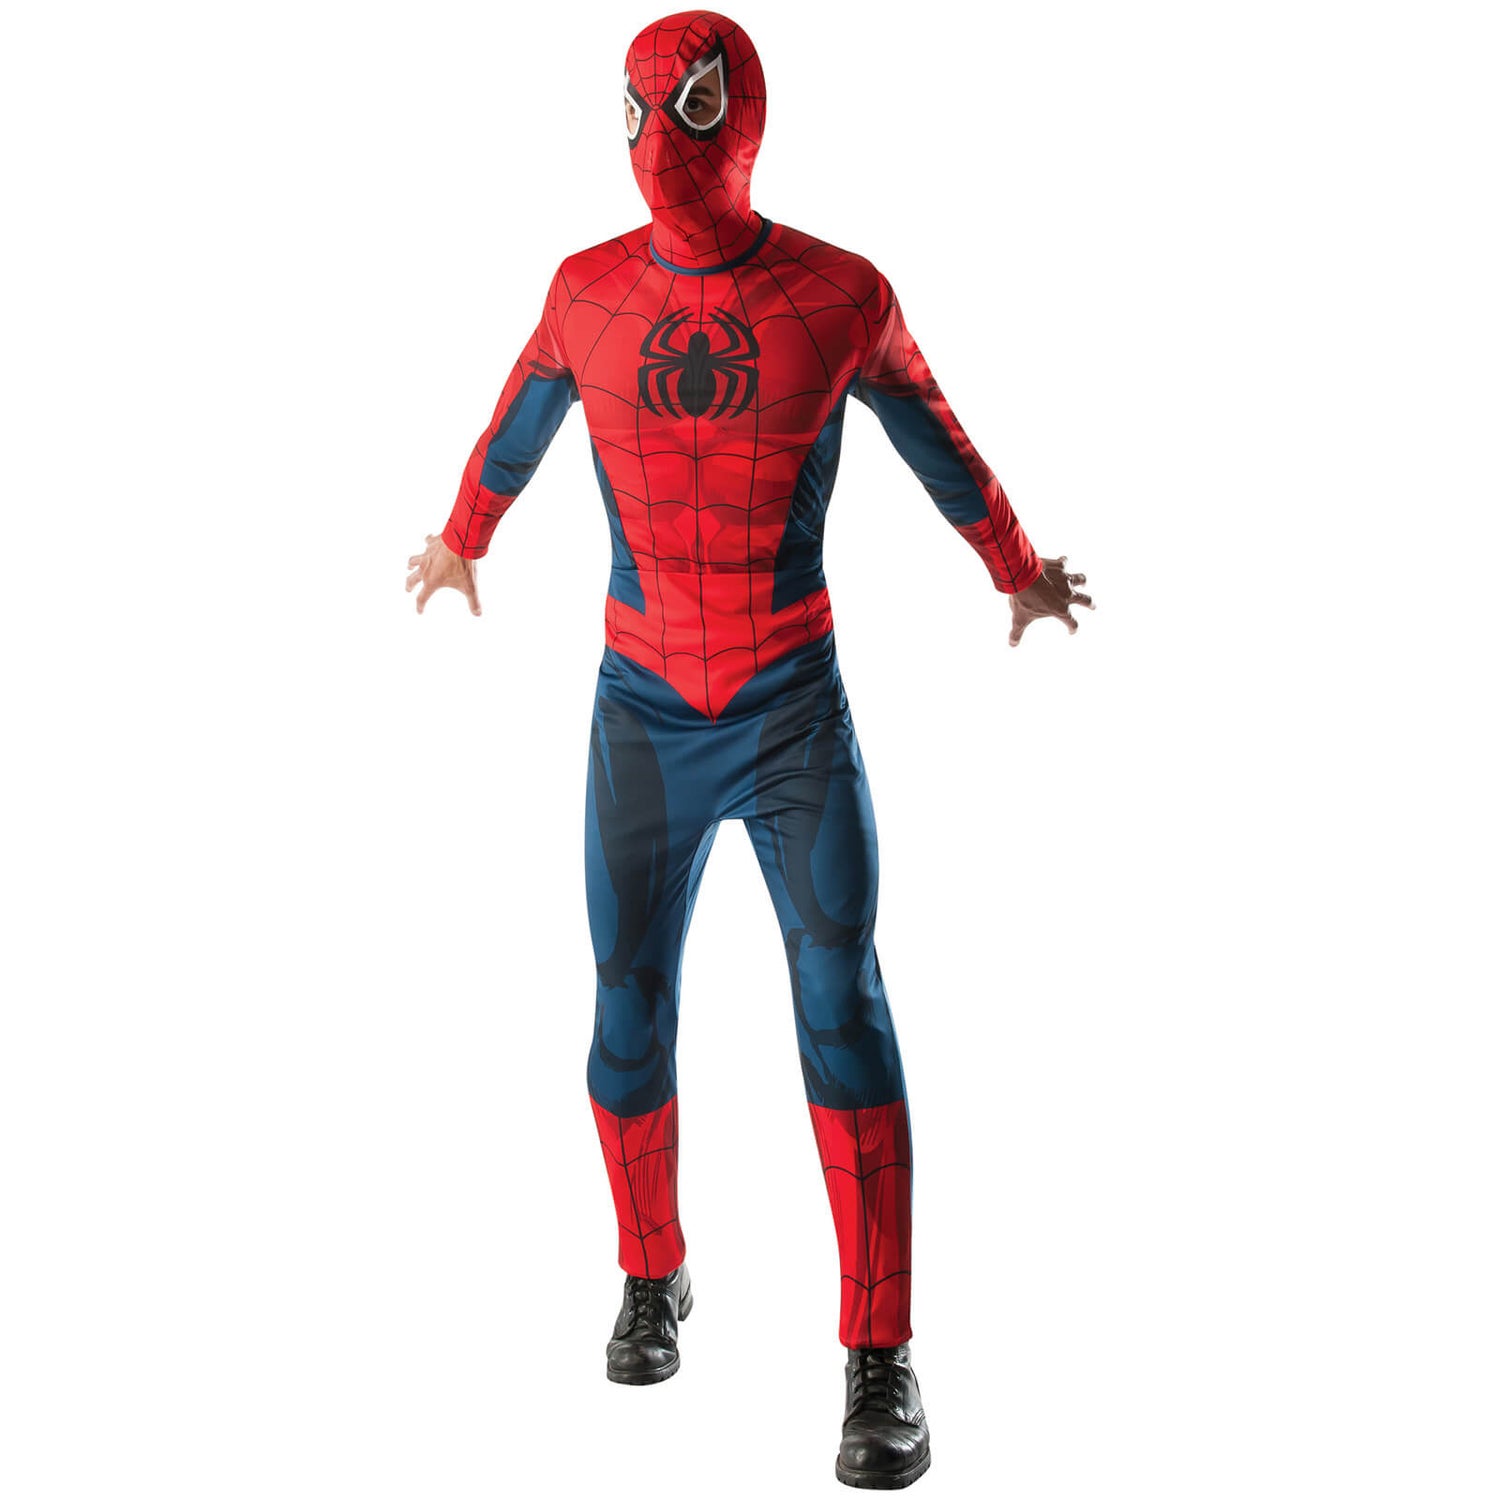 Official Rubies Marvel Spider-Man Adult Costume - XL Size